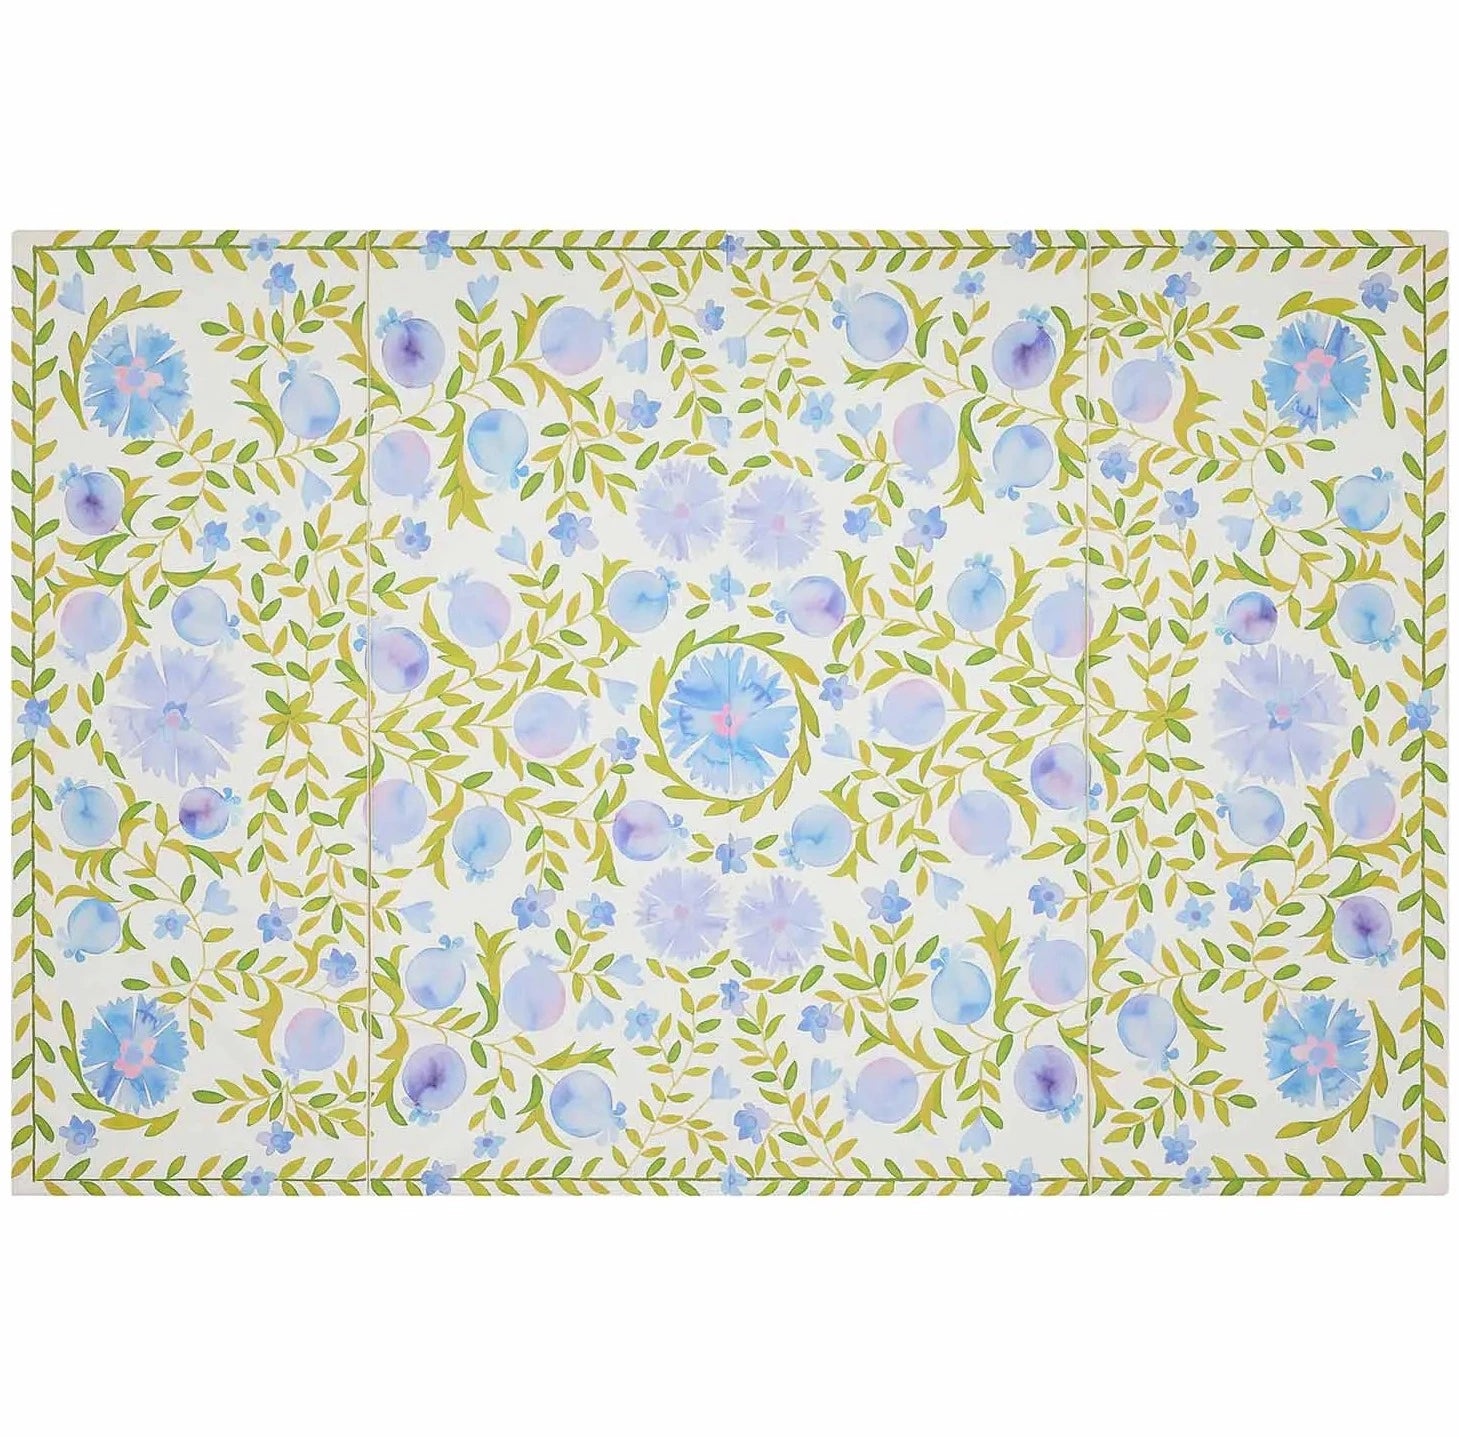 Bluebell blue green and white floral tumbling mat